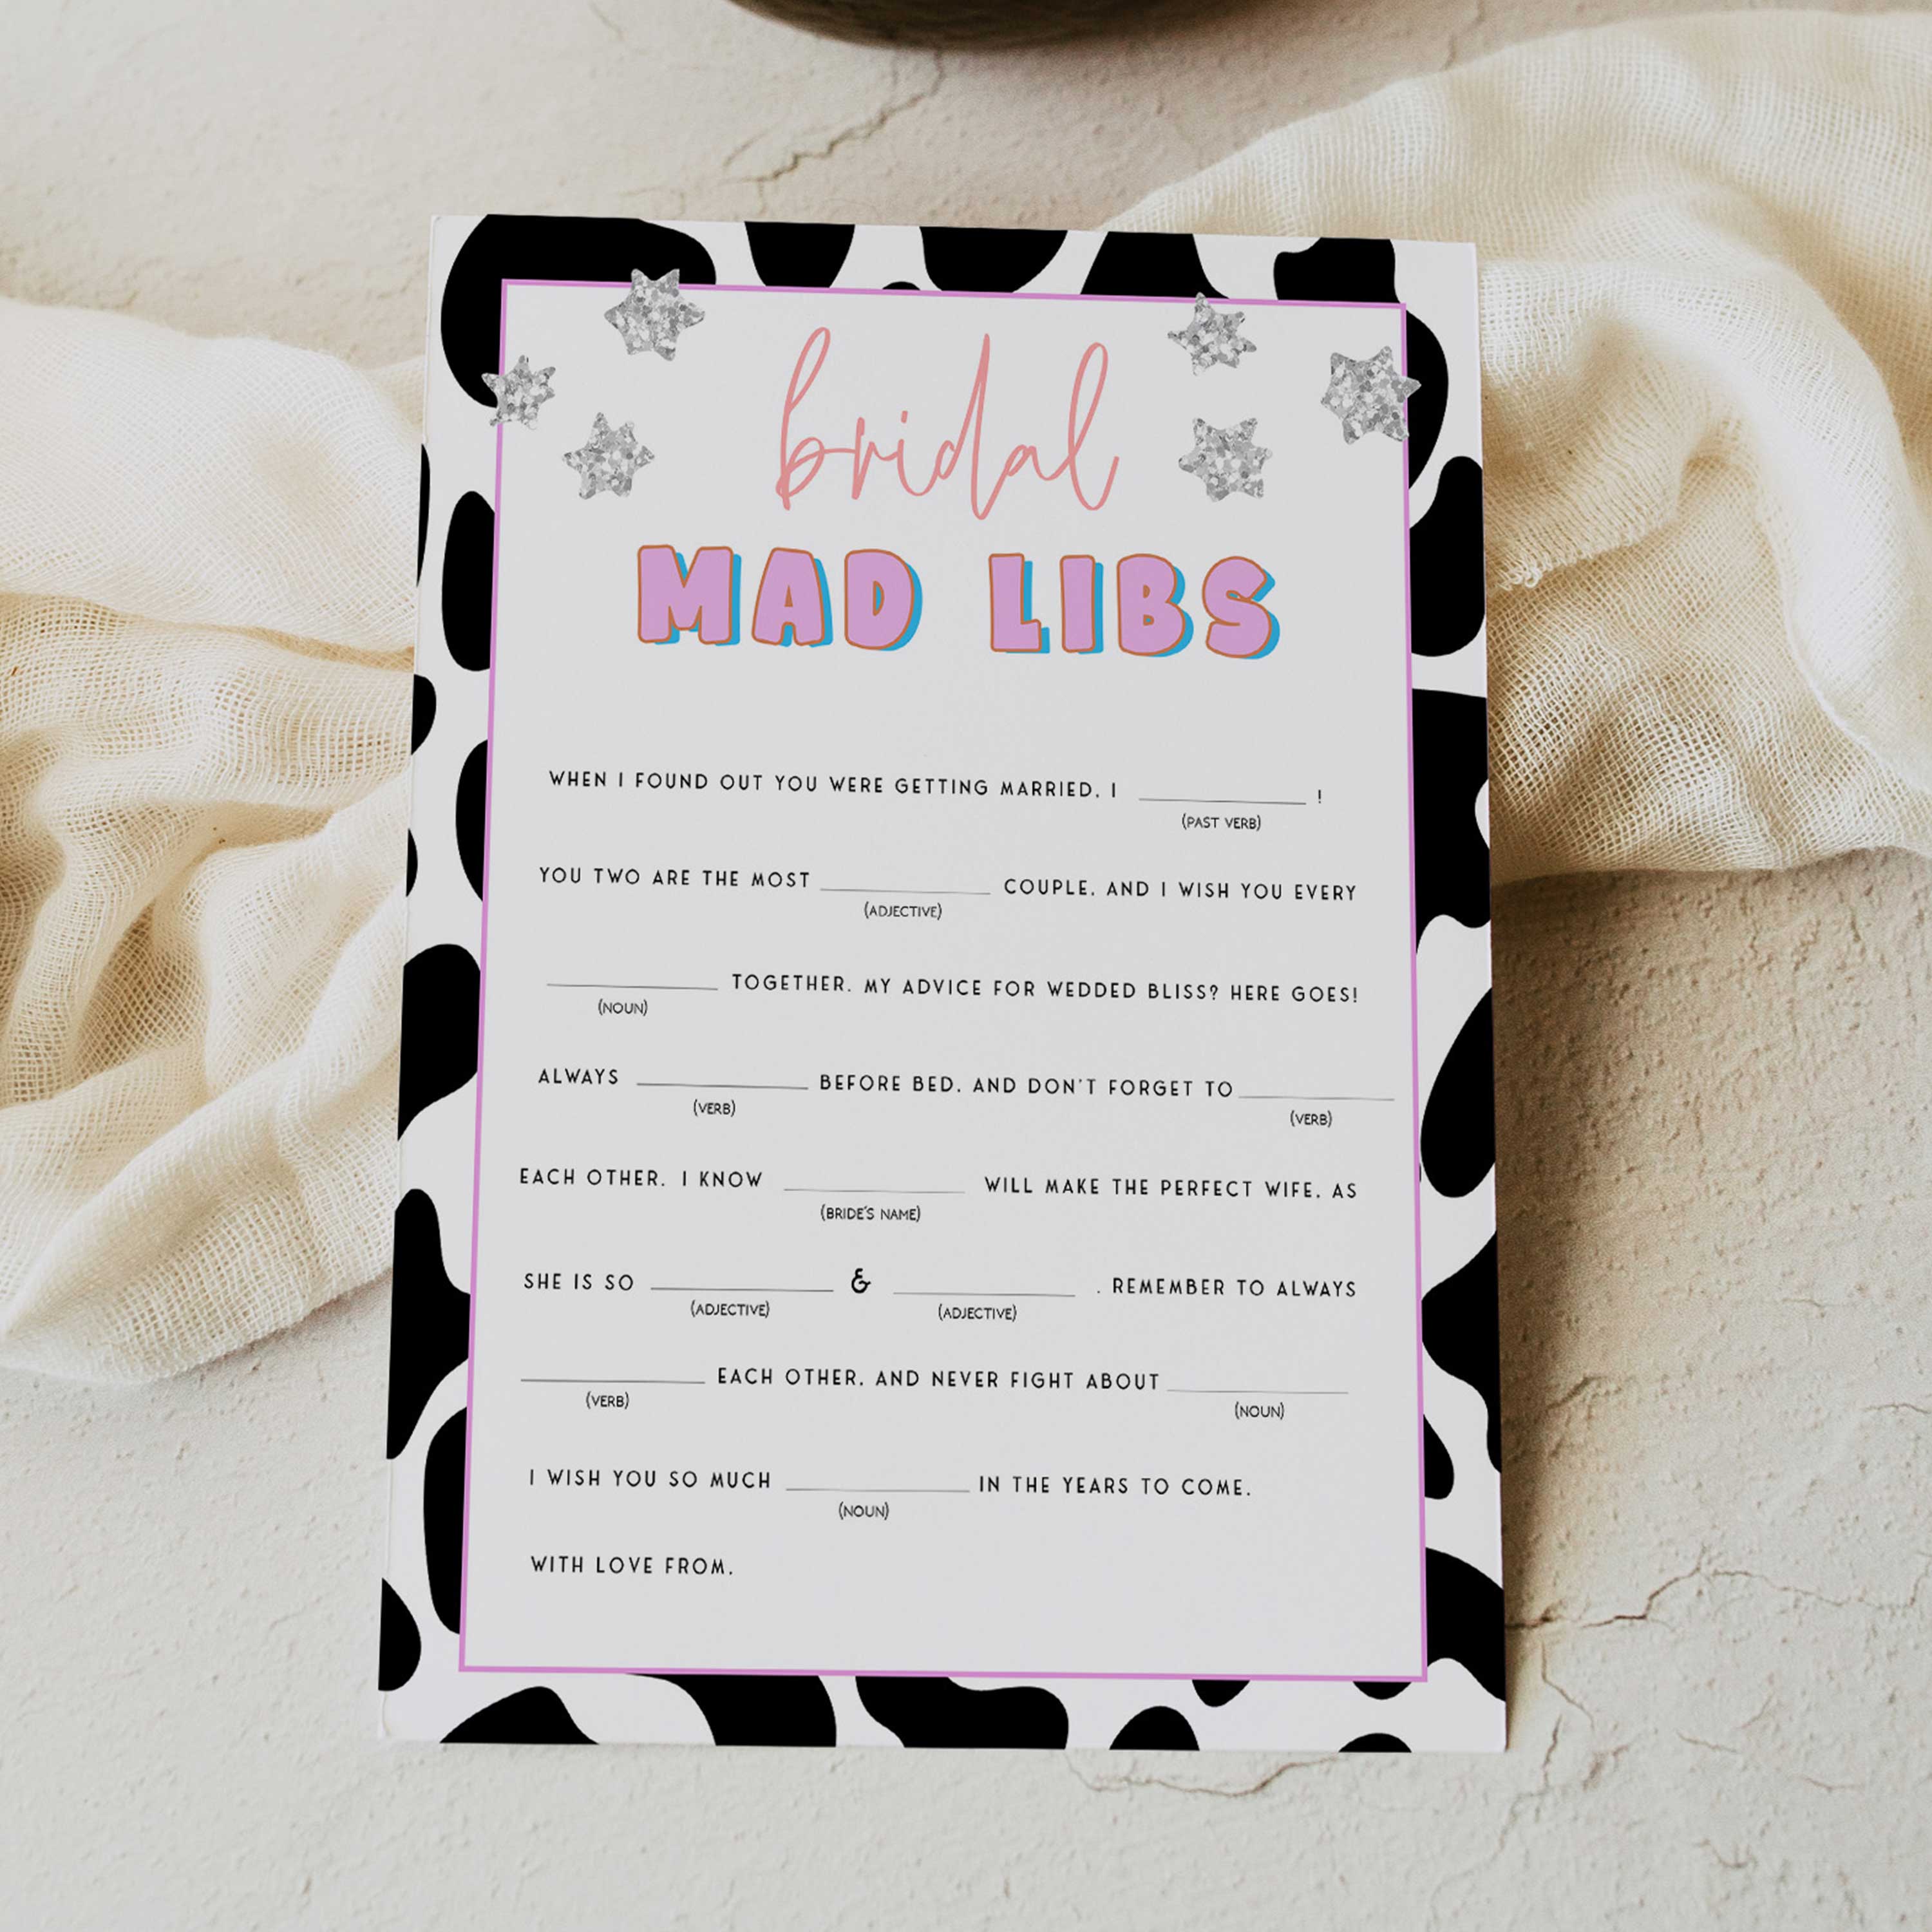 bridal shower mad libs game, Space cowgirl bridal shower games, printable bridal shower games, bridal games, bridal shower games, disco bridal games